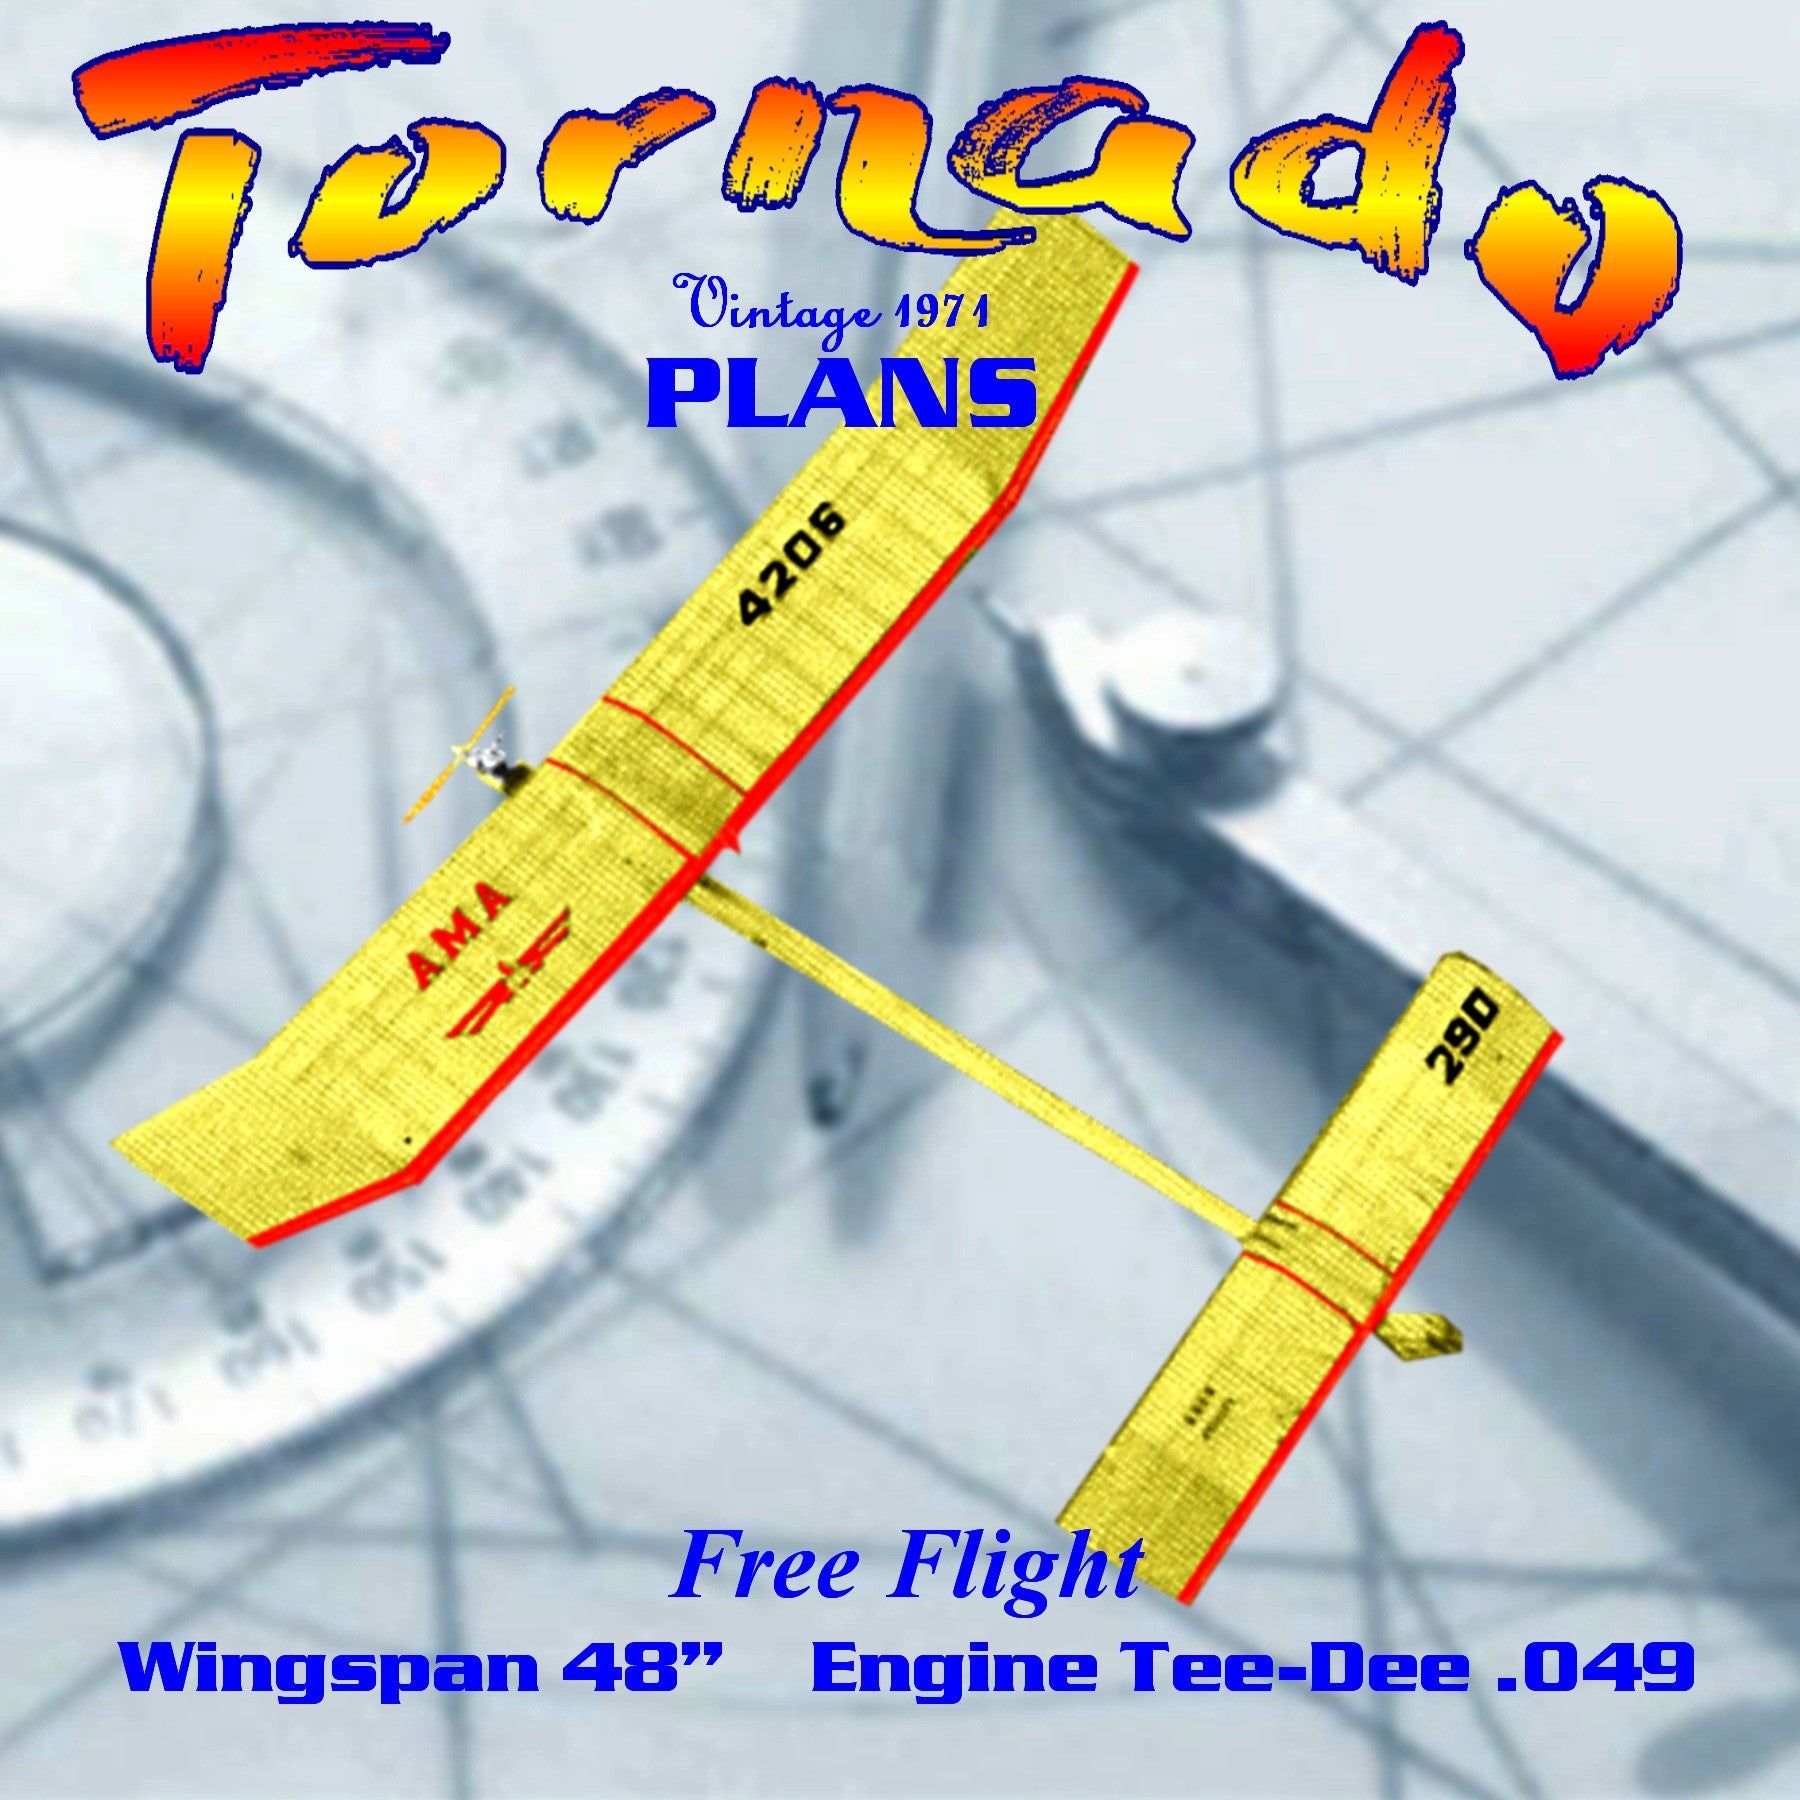 full size printed plan free flight tee-dee .049  ‘tornado’ strong contest potential